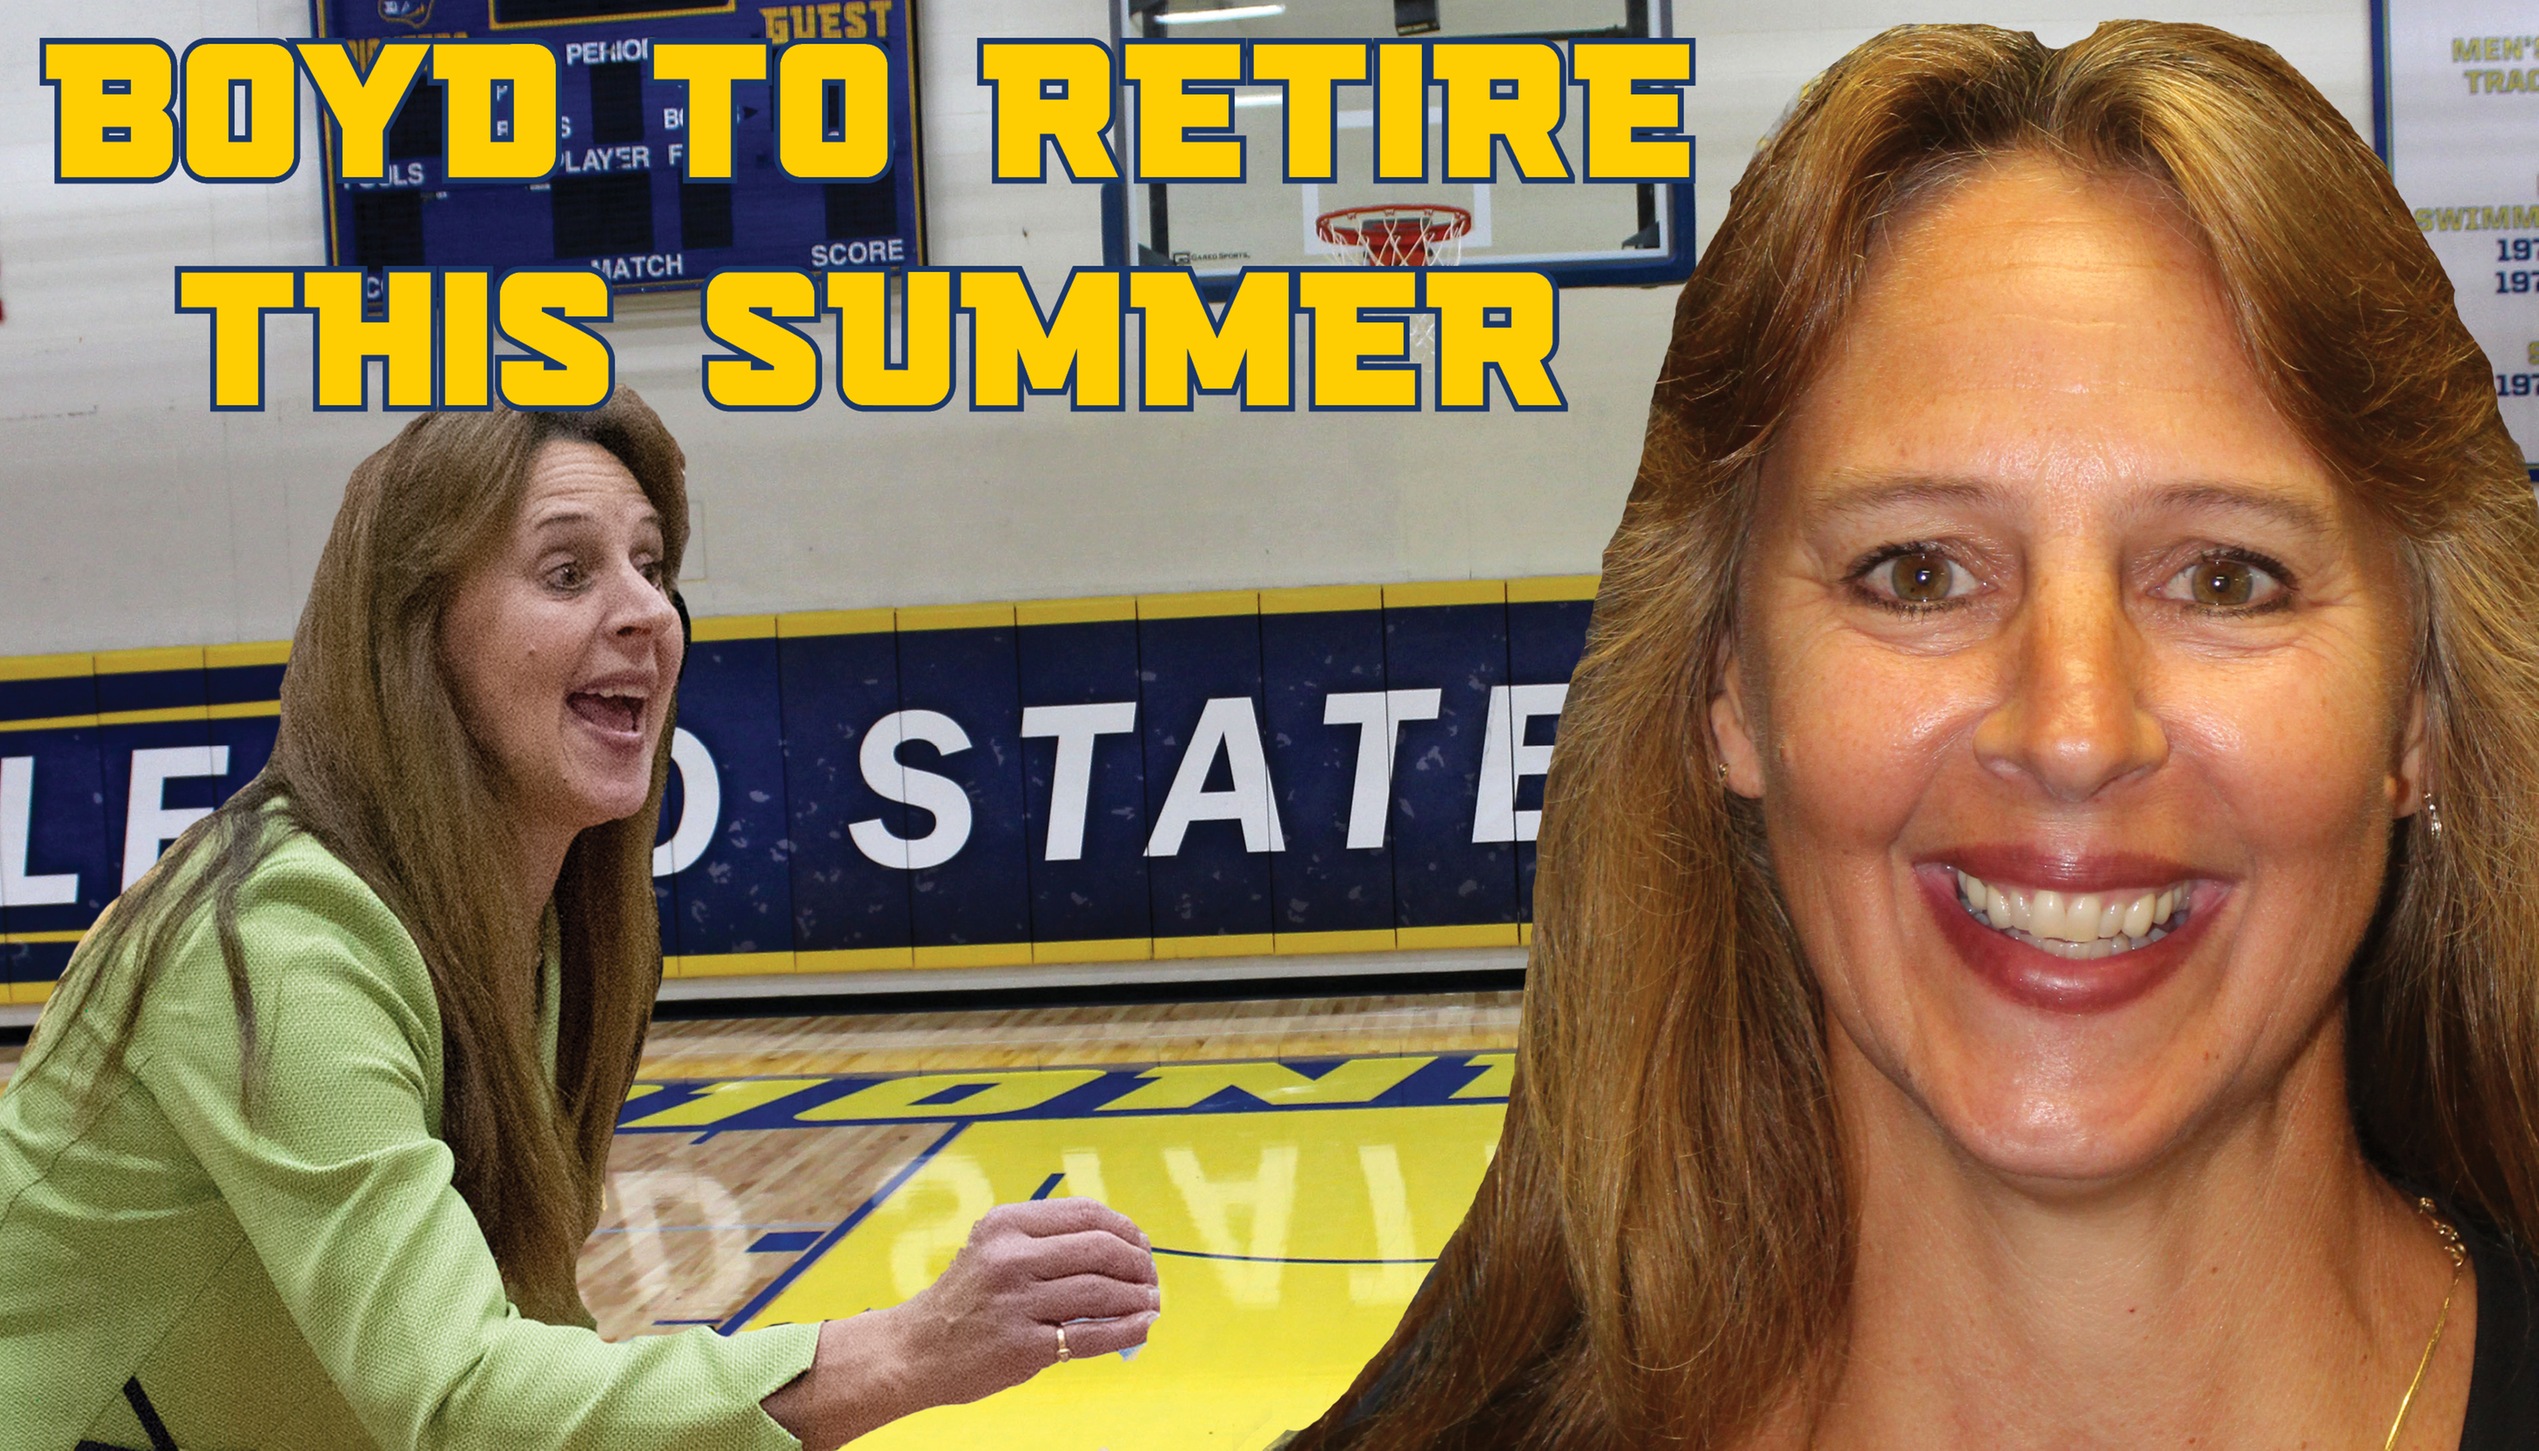 Women's Basketball Gina Boyd to Retire this summer - picture is a head shot of Coach Boyd and a picture of her coaching